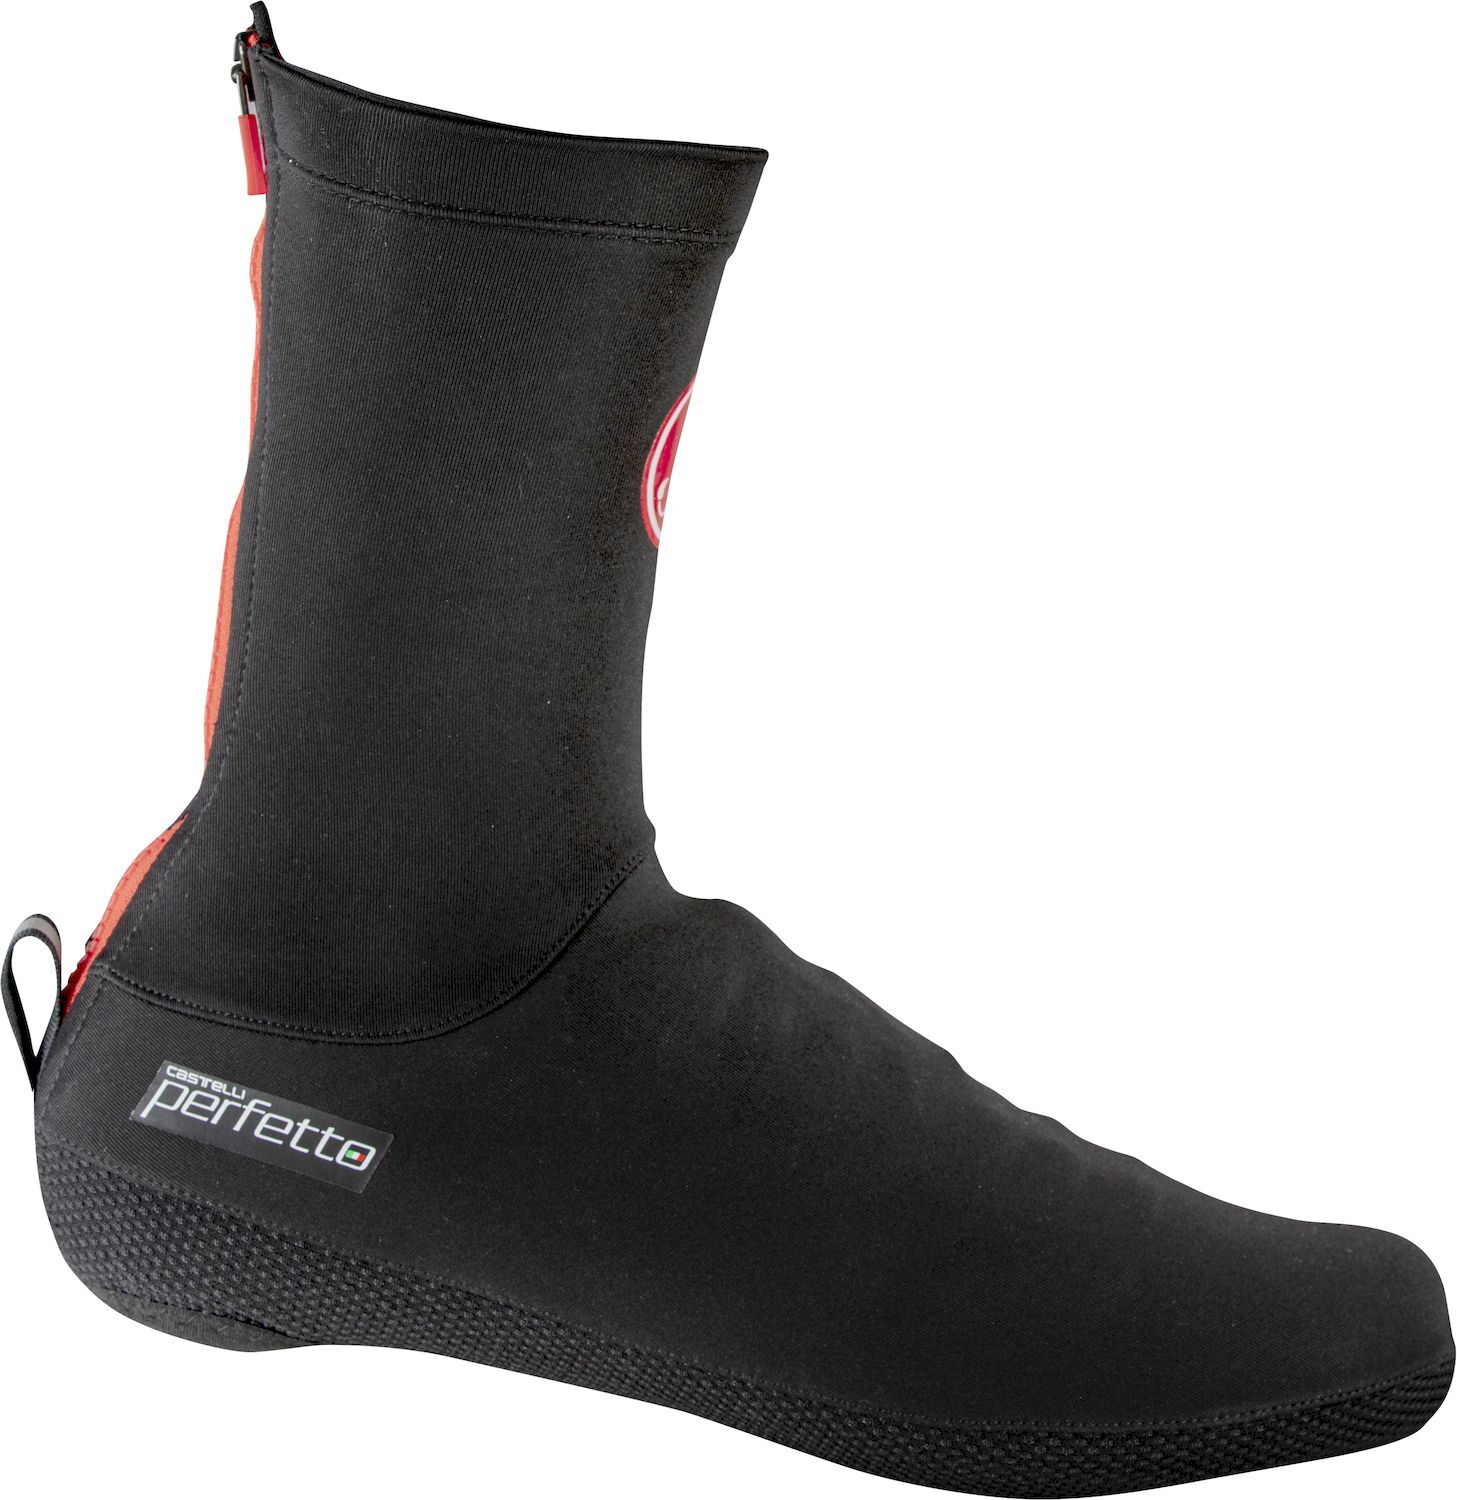 Castelli Perfetto - Cycling overshoes